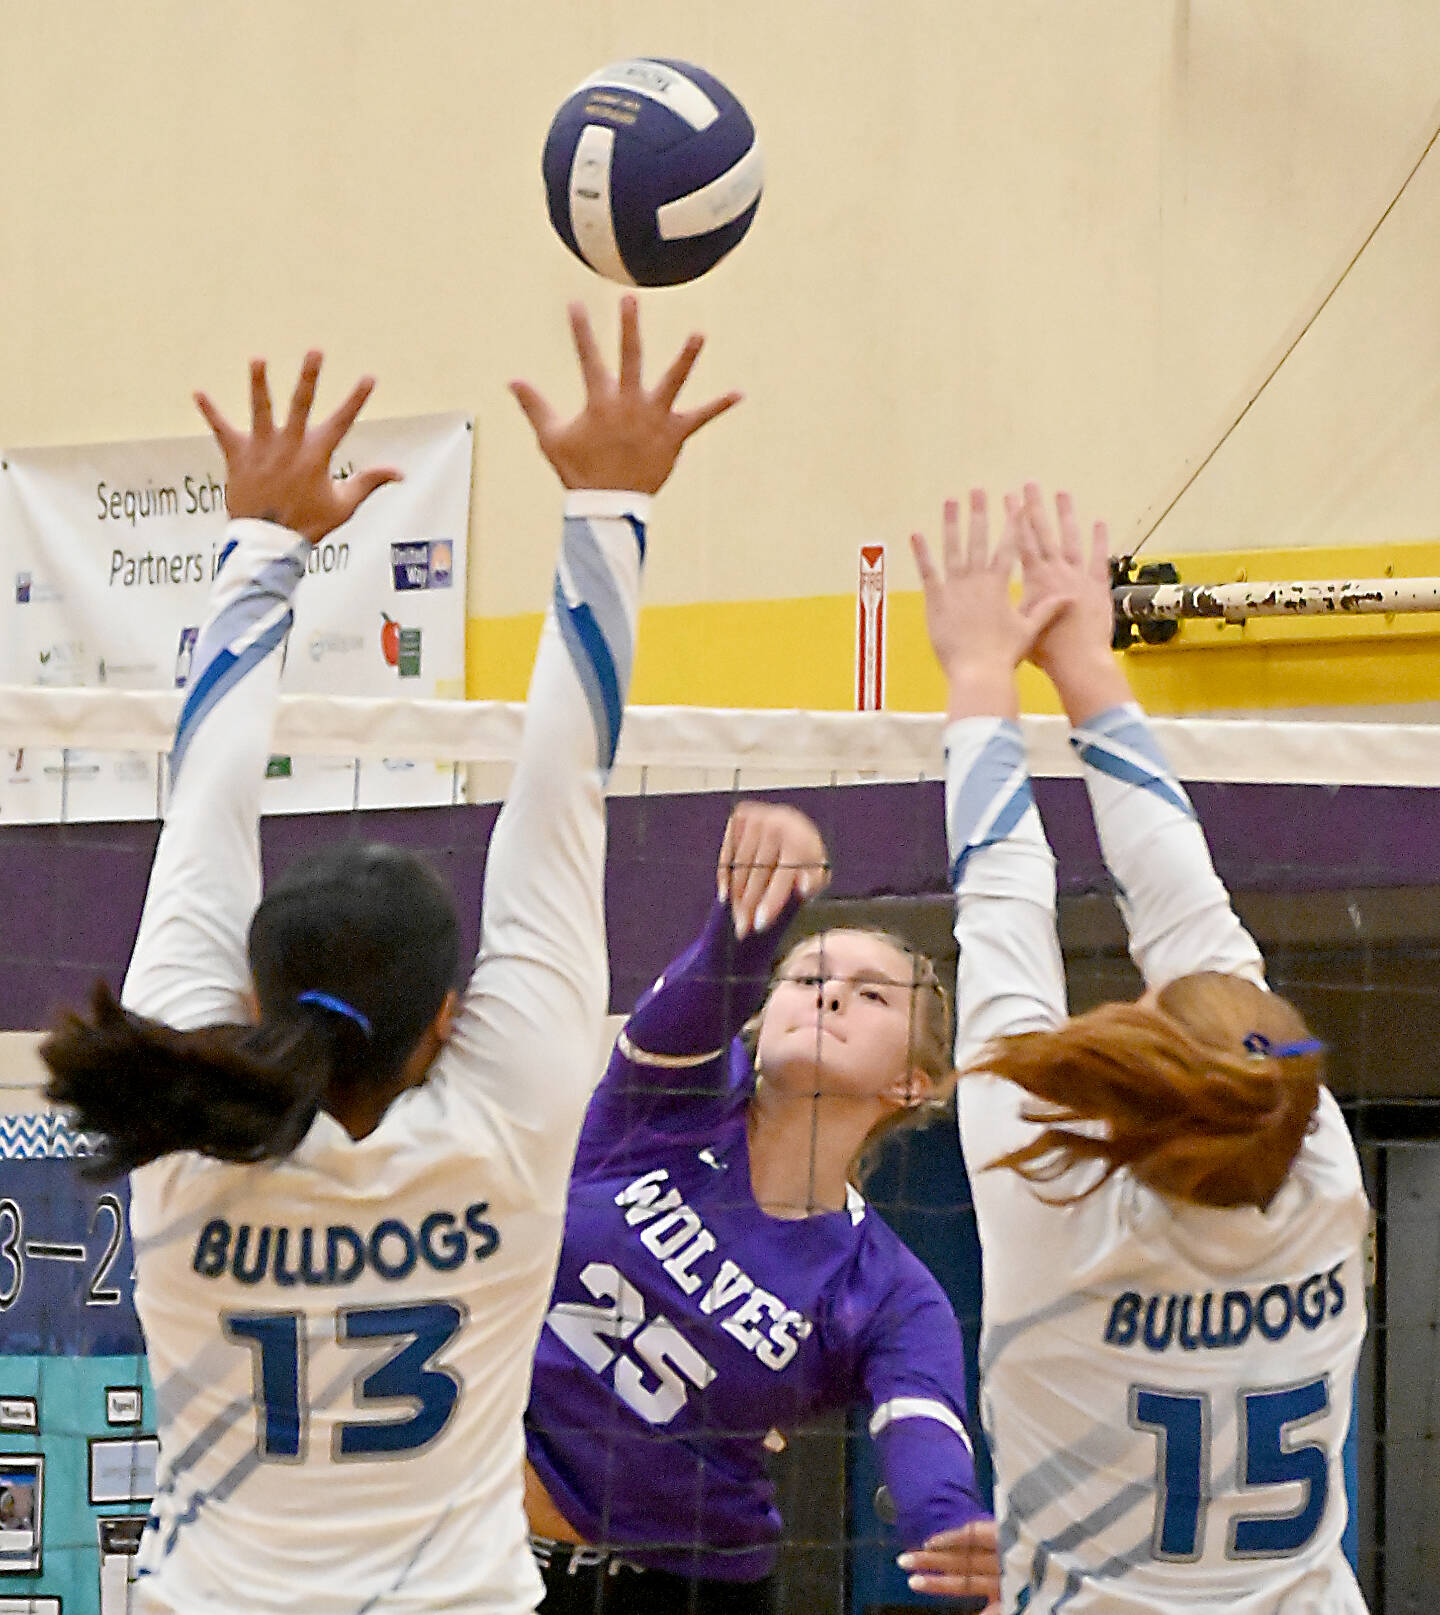 Michael Dashiell/Olympic Peninsula News Group
Sequim middle hitter Jolene Vaara spikes the ball against North Mason on Tuesday at Sequim Middle School. Vaara led the team with 16 kills and seven stuff blocks.